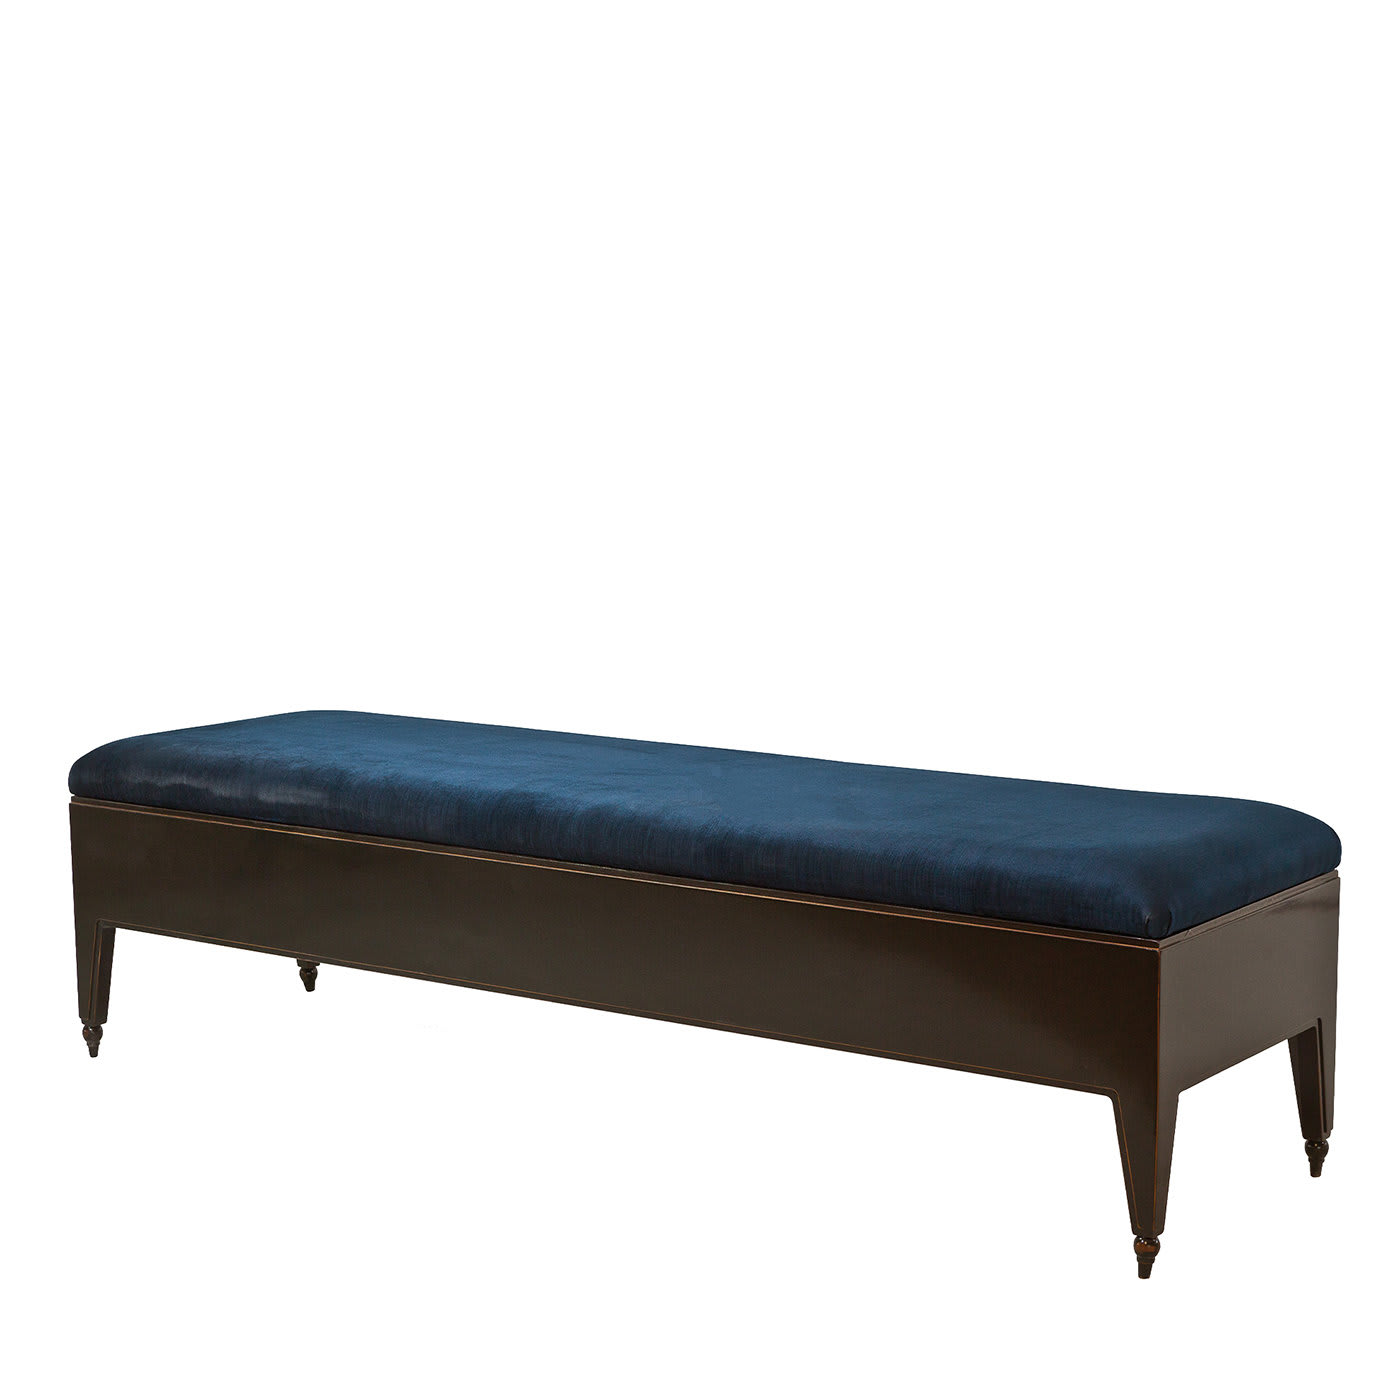 Colonial-Style Blue and Black Bench - Palmobili